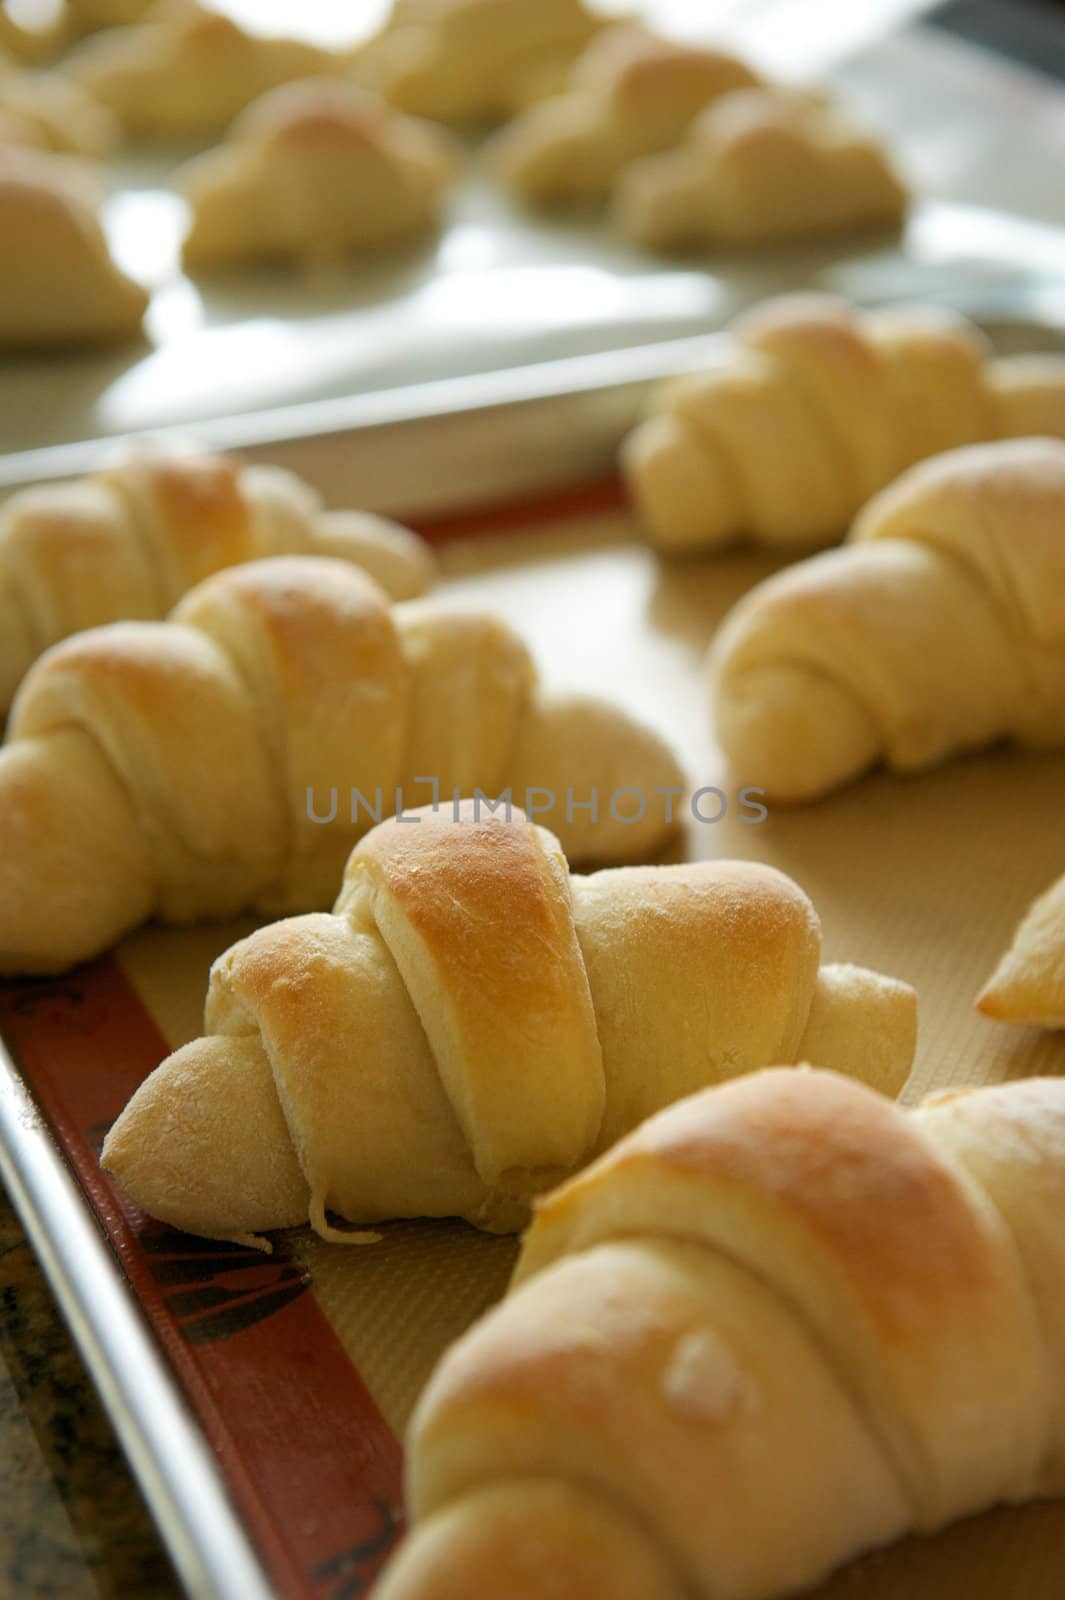 A Tray of Rolls Taken Fresh from the Oven by pixelsnap